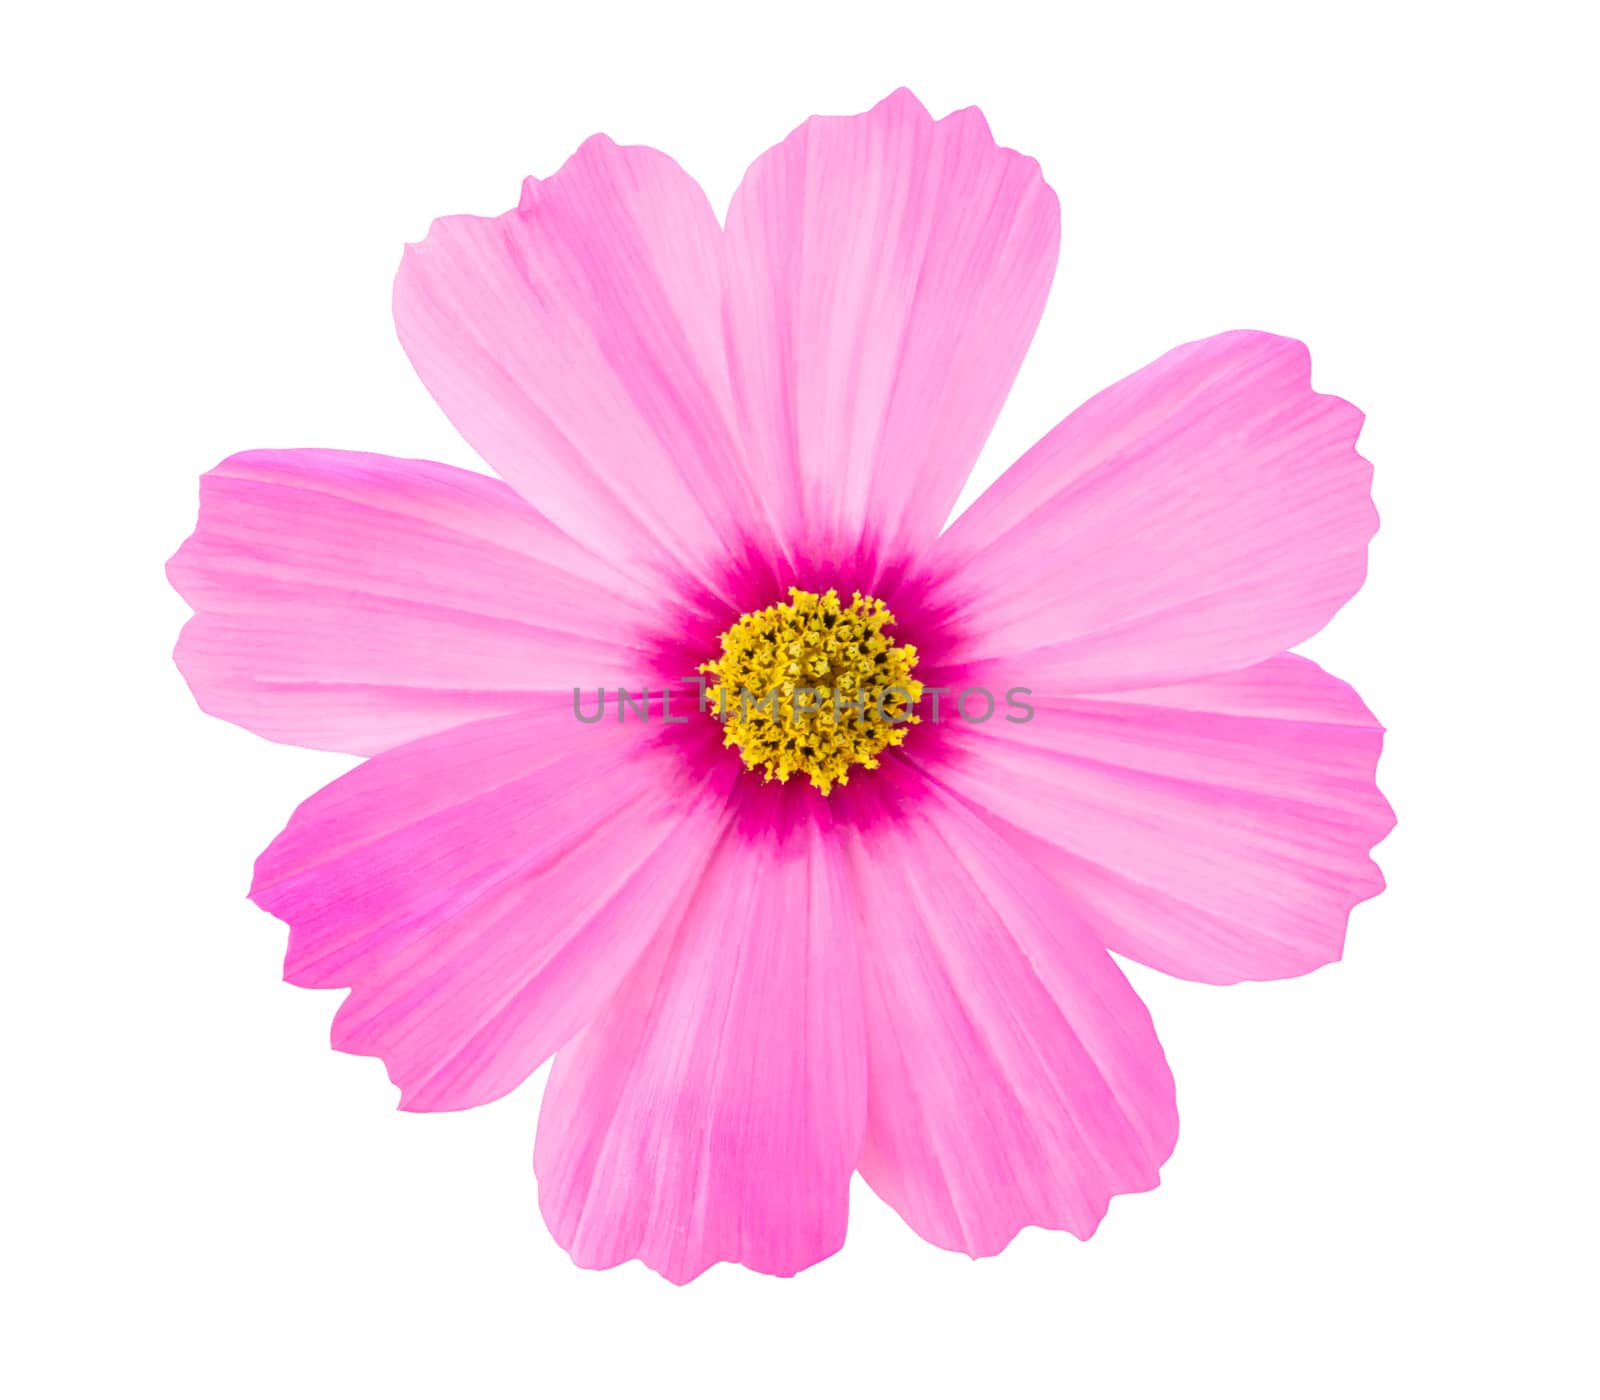 Pink Cosmos flower isolated on white background by pt.pongsak@gmail.com